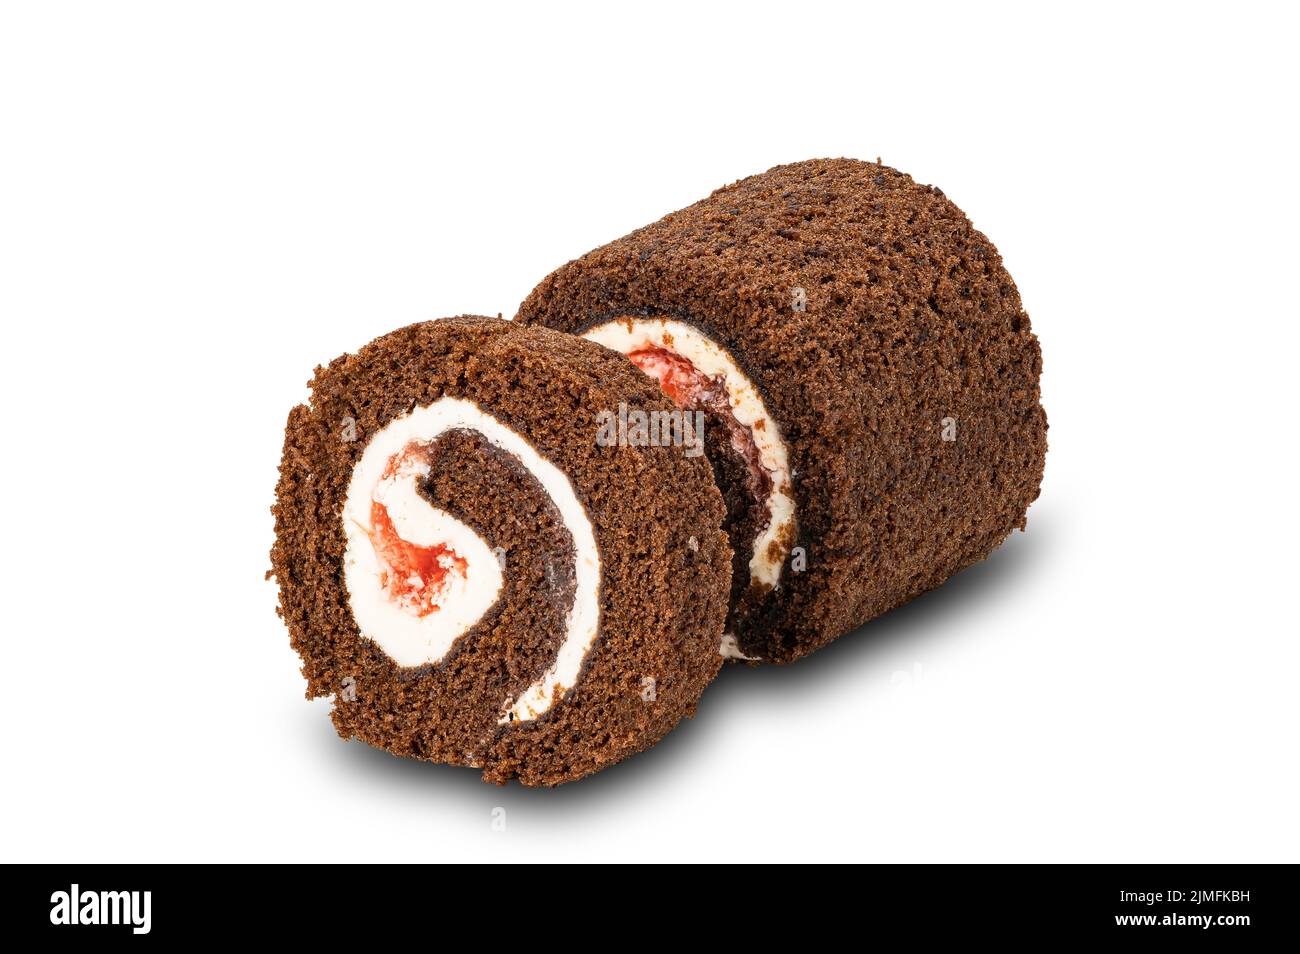 Delicious homemade Mini Black Forest Chocolate Sponge Cake Roll filled with white cream isolated on white background. Stock Photo